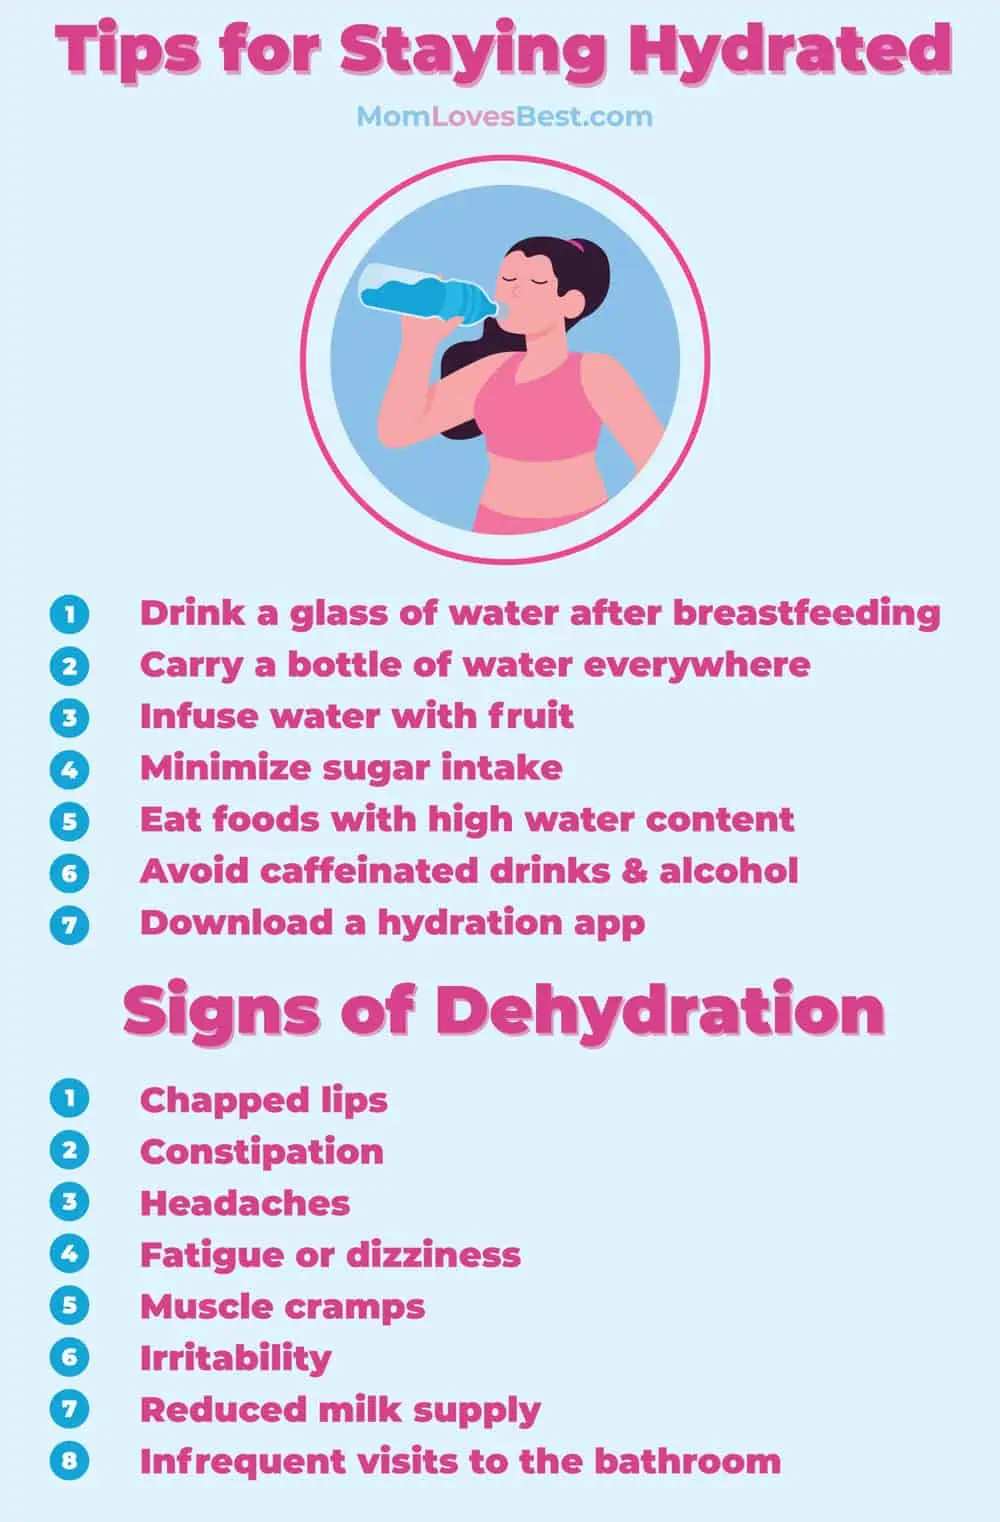 tips for staying hydrated when breastfeeding